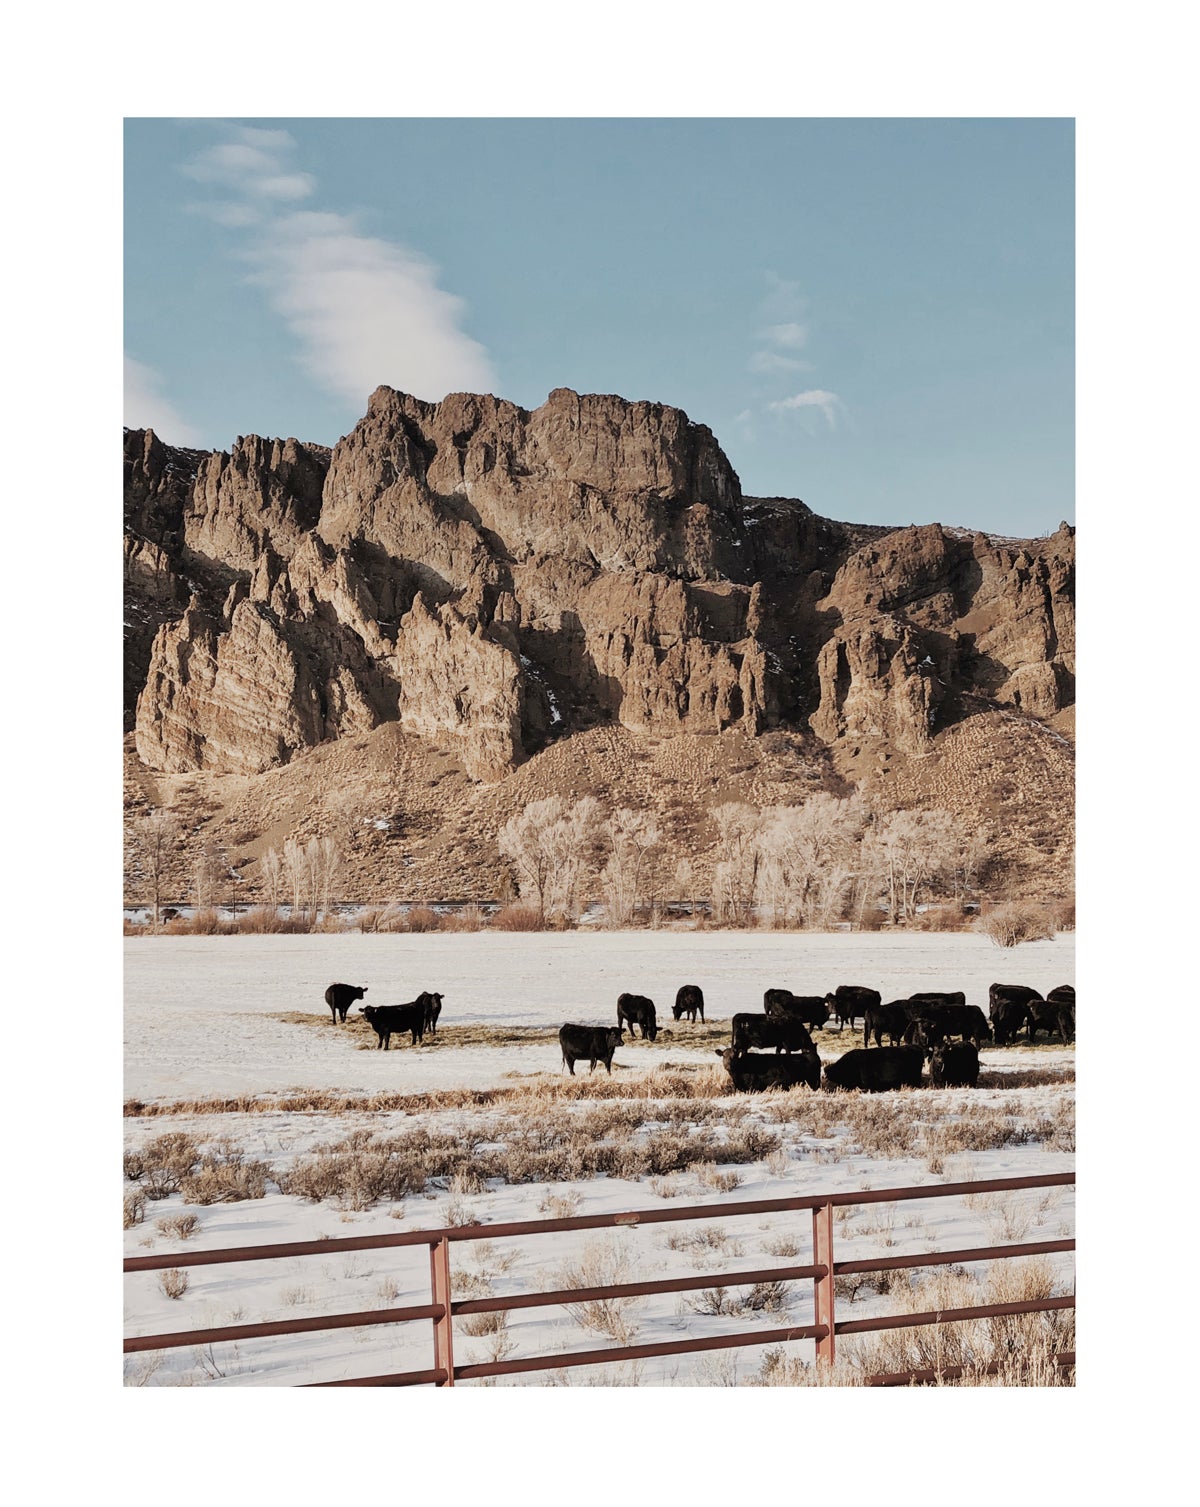 Photo by Molly Olwig of cattle grazing in front of rock formations